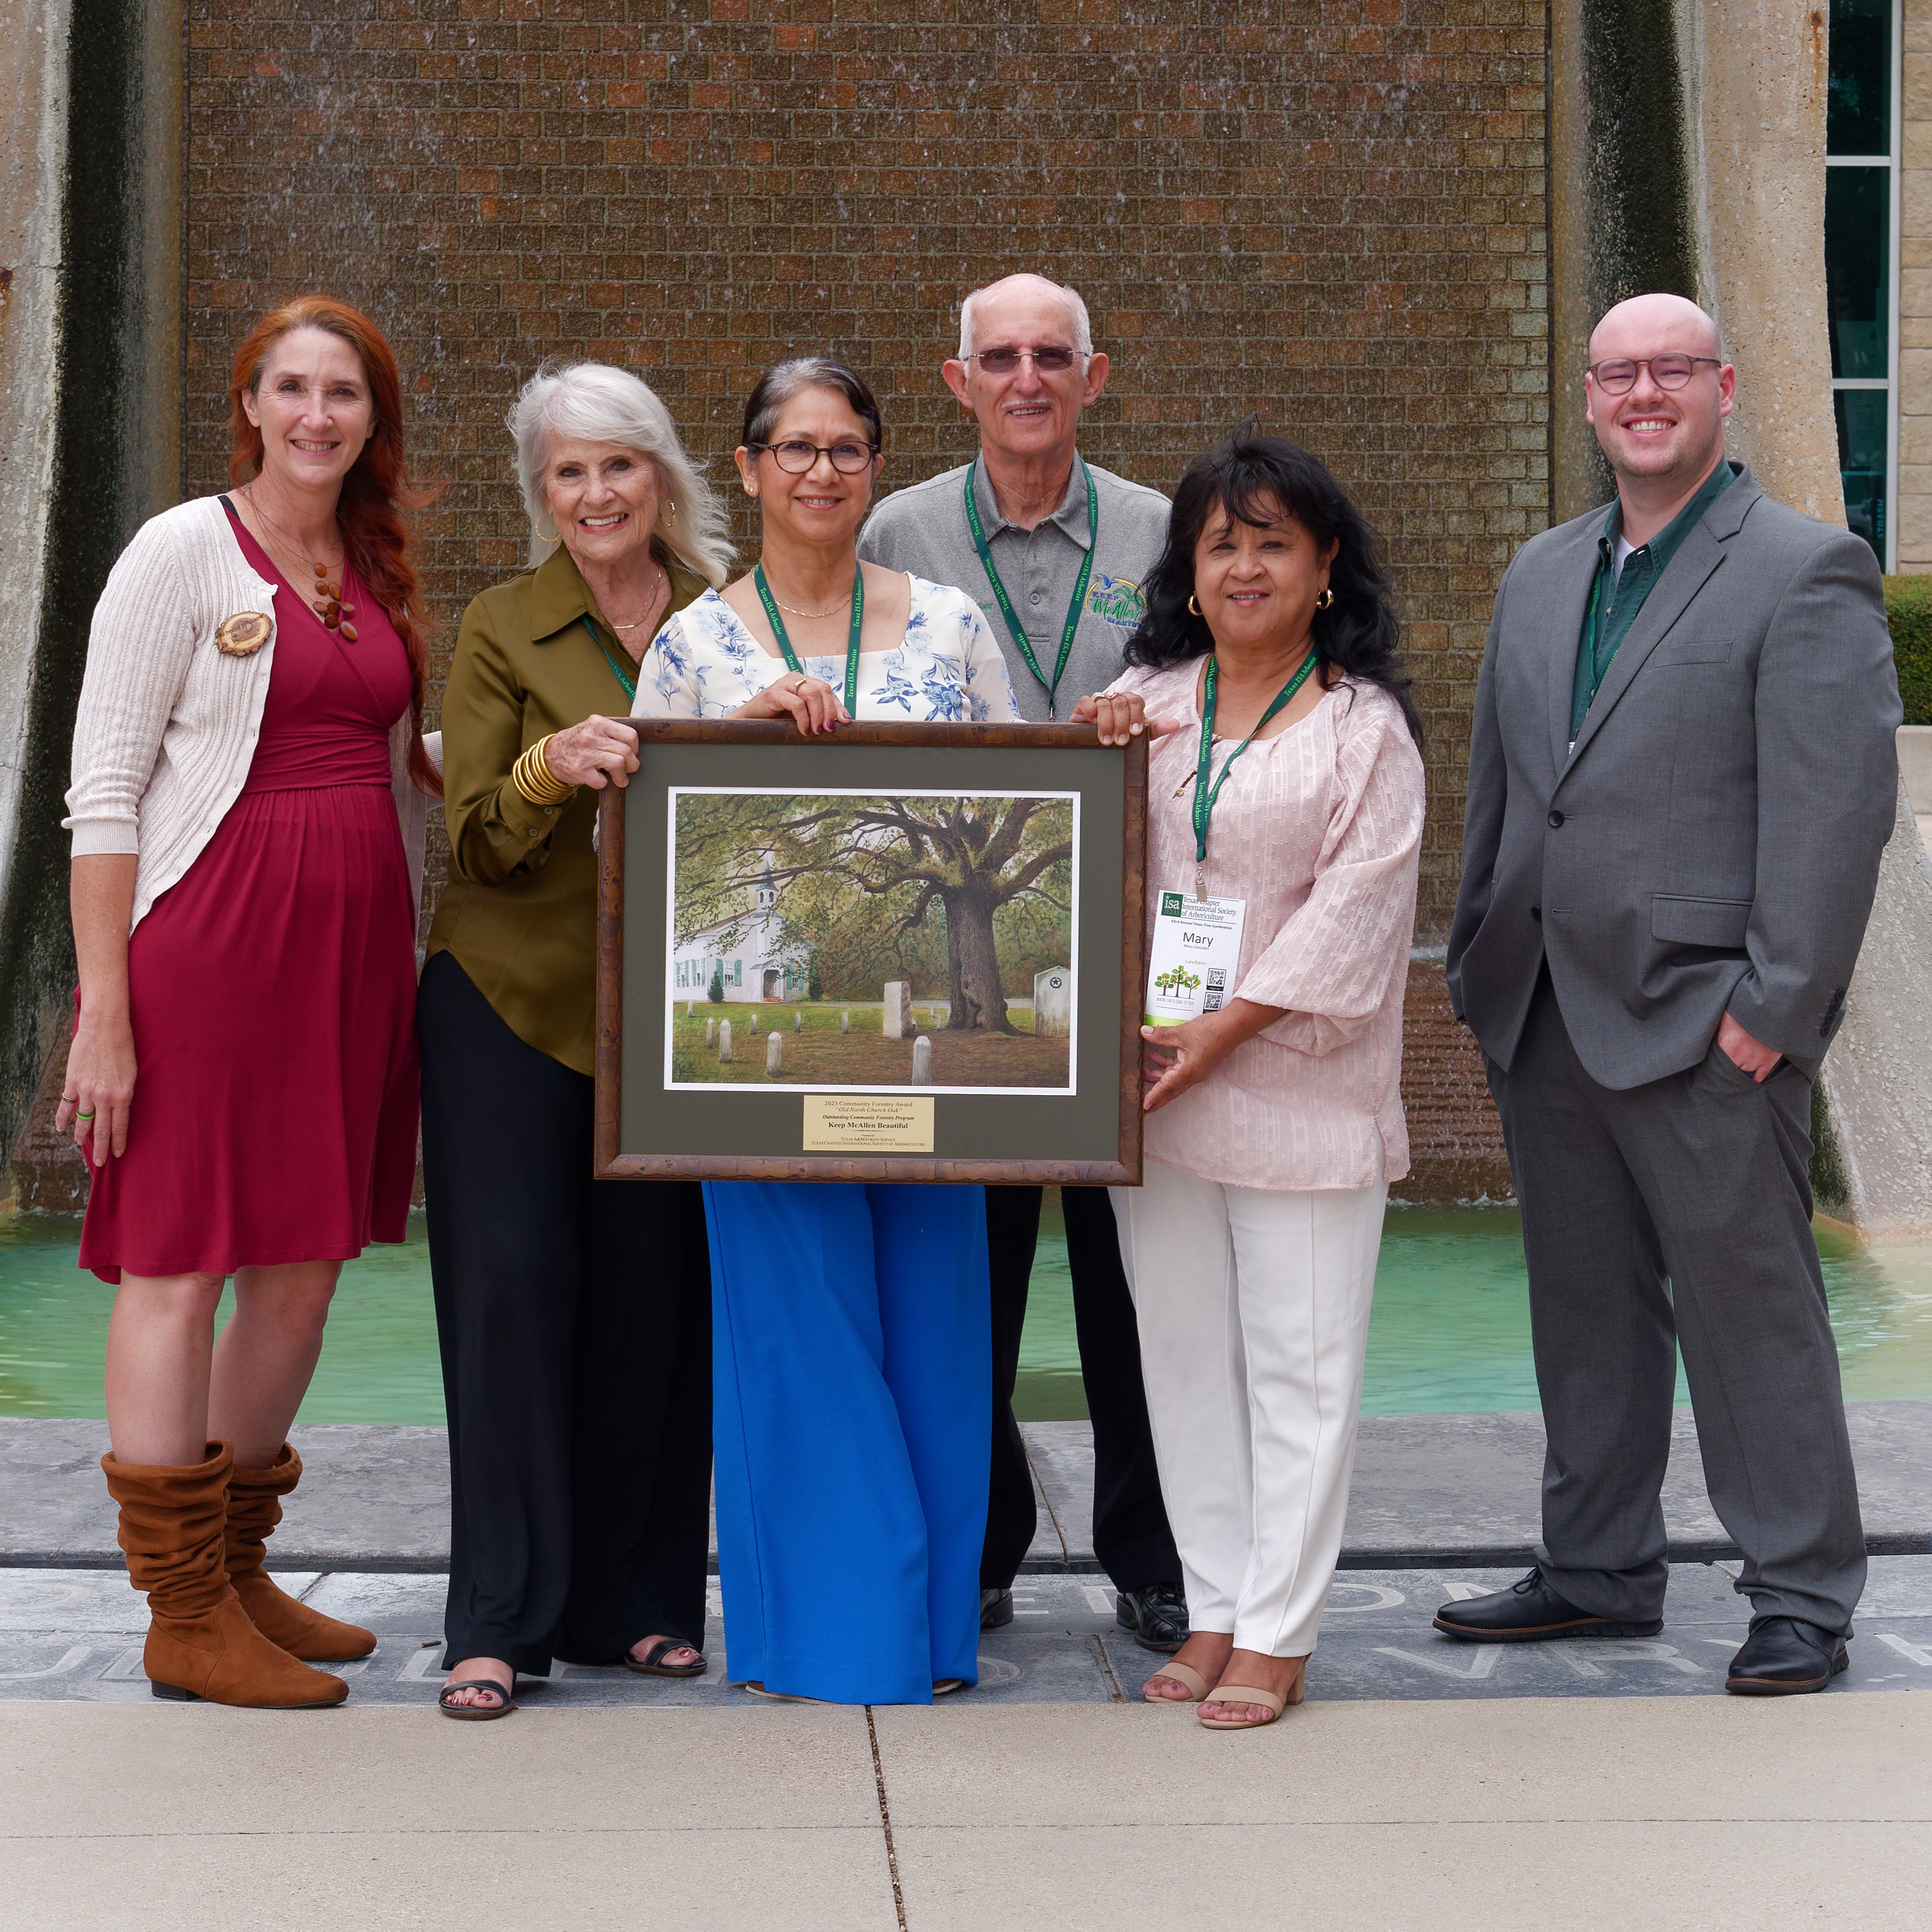 Outstanding tree care professionals, projects recognized at 2023 Texas Tree Conference